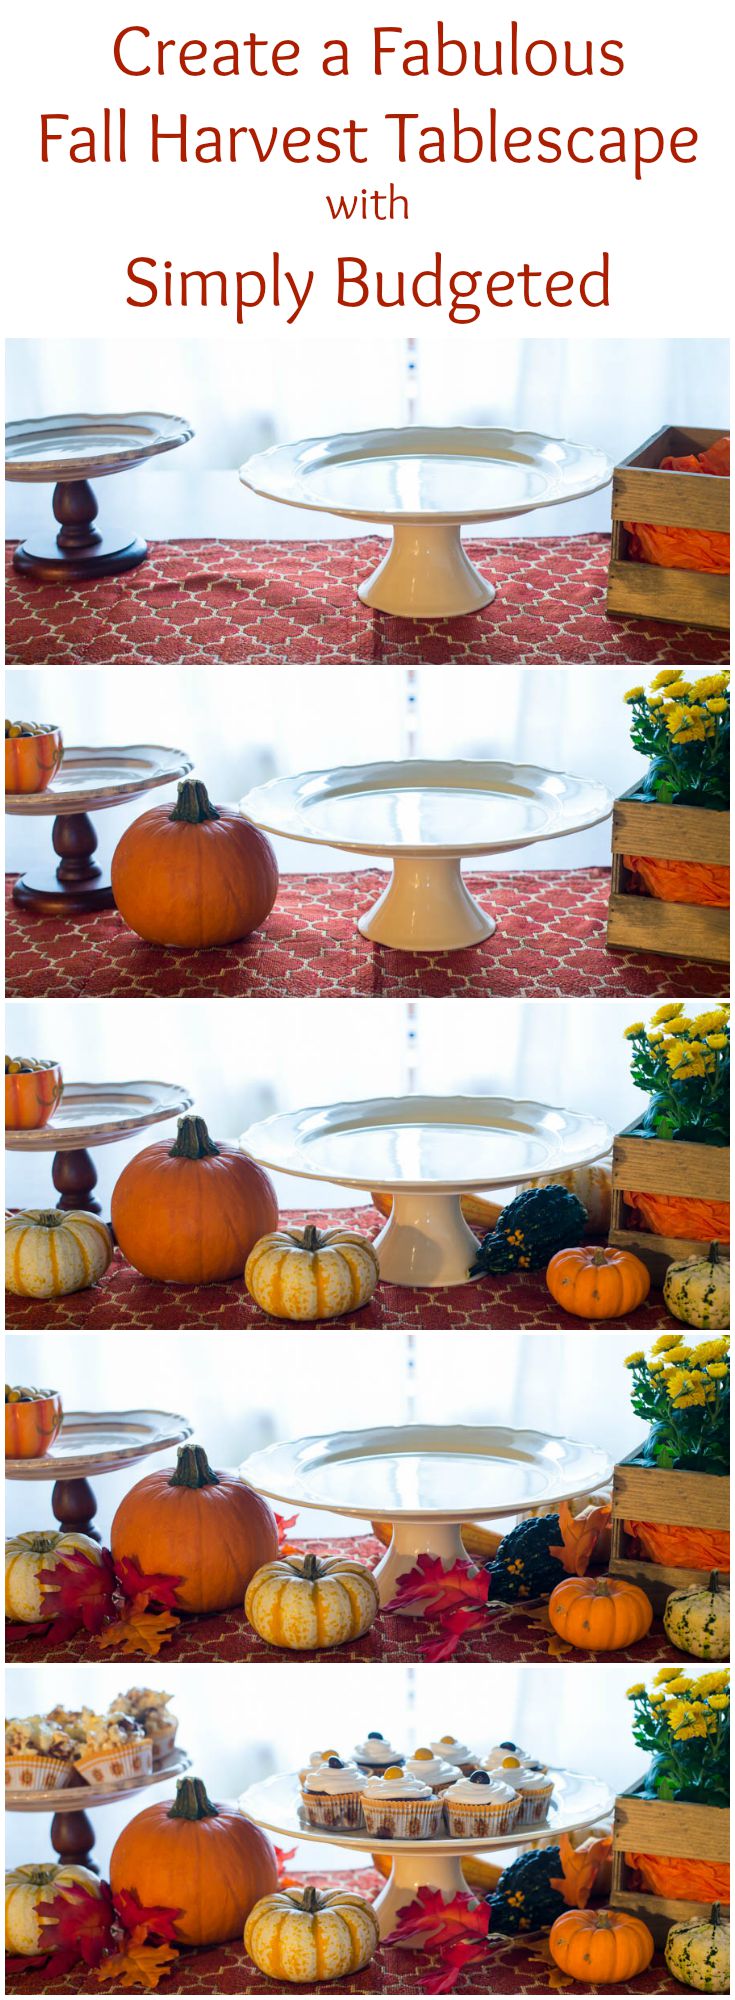 Fall-Harvest-Tablescape-Collage